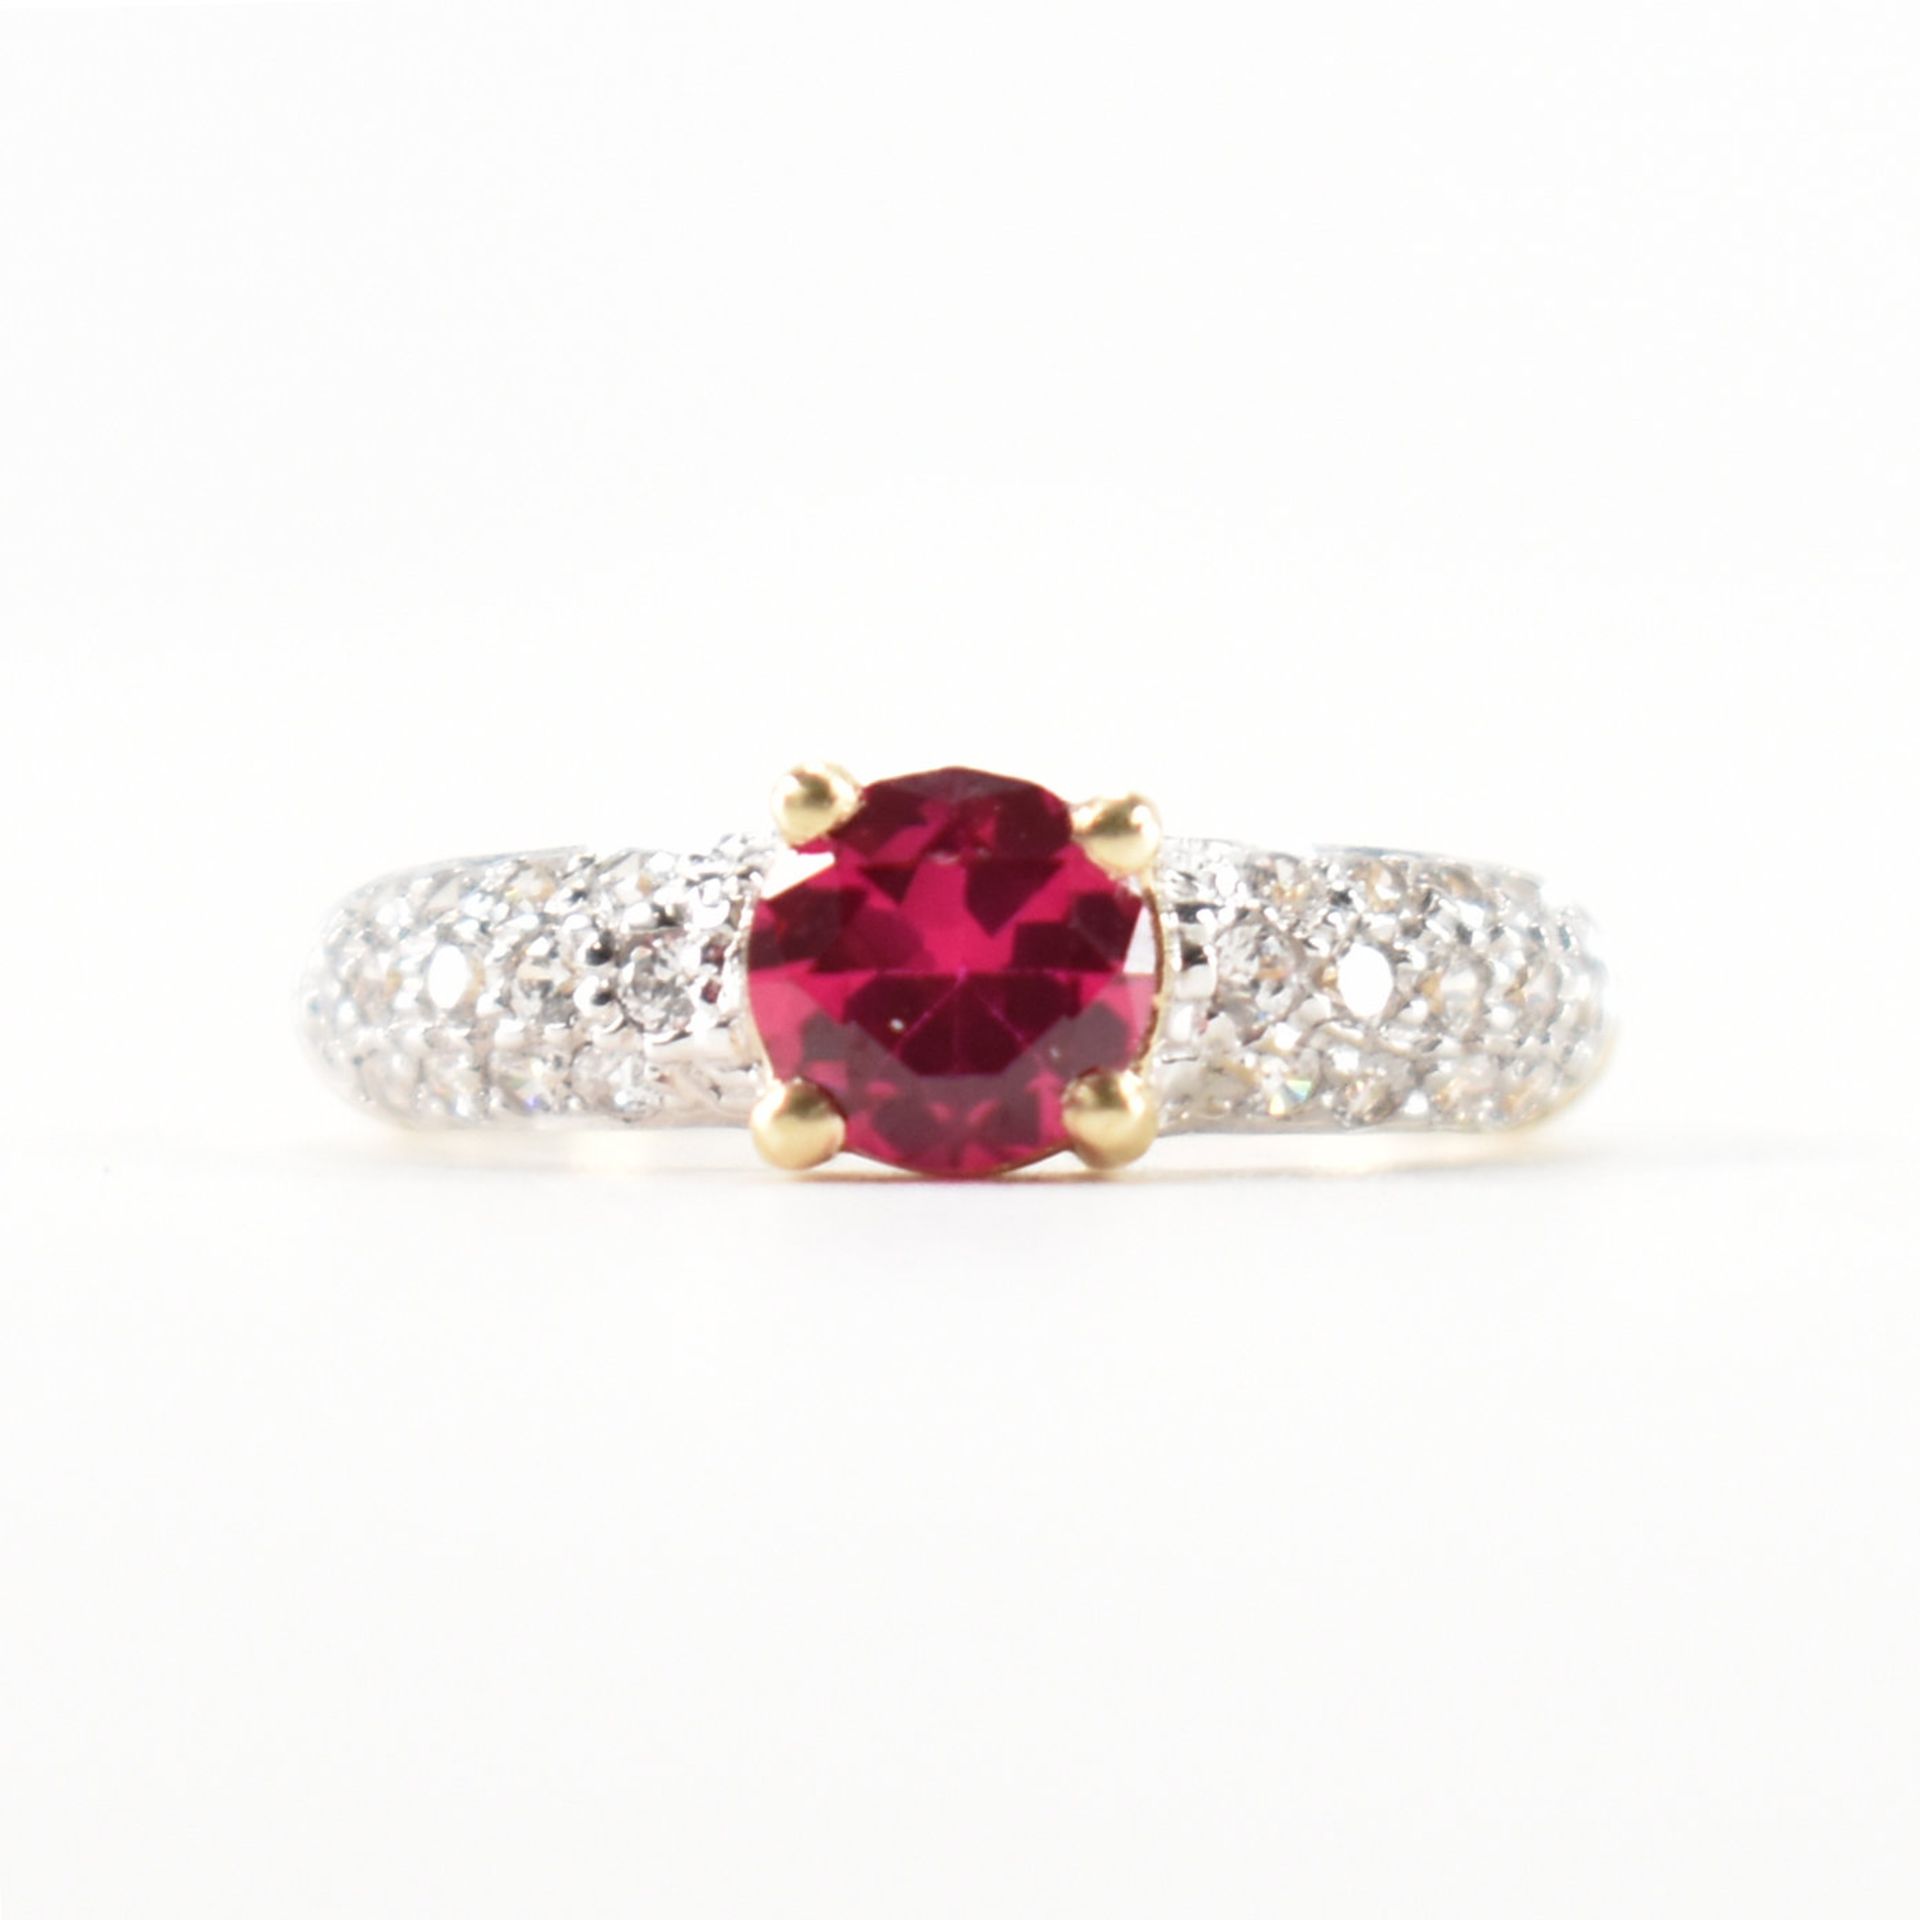 HALLMARKED 9CT GOLD SYNTHETIC RUBY & CZ RING